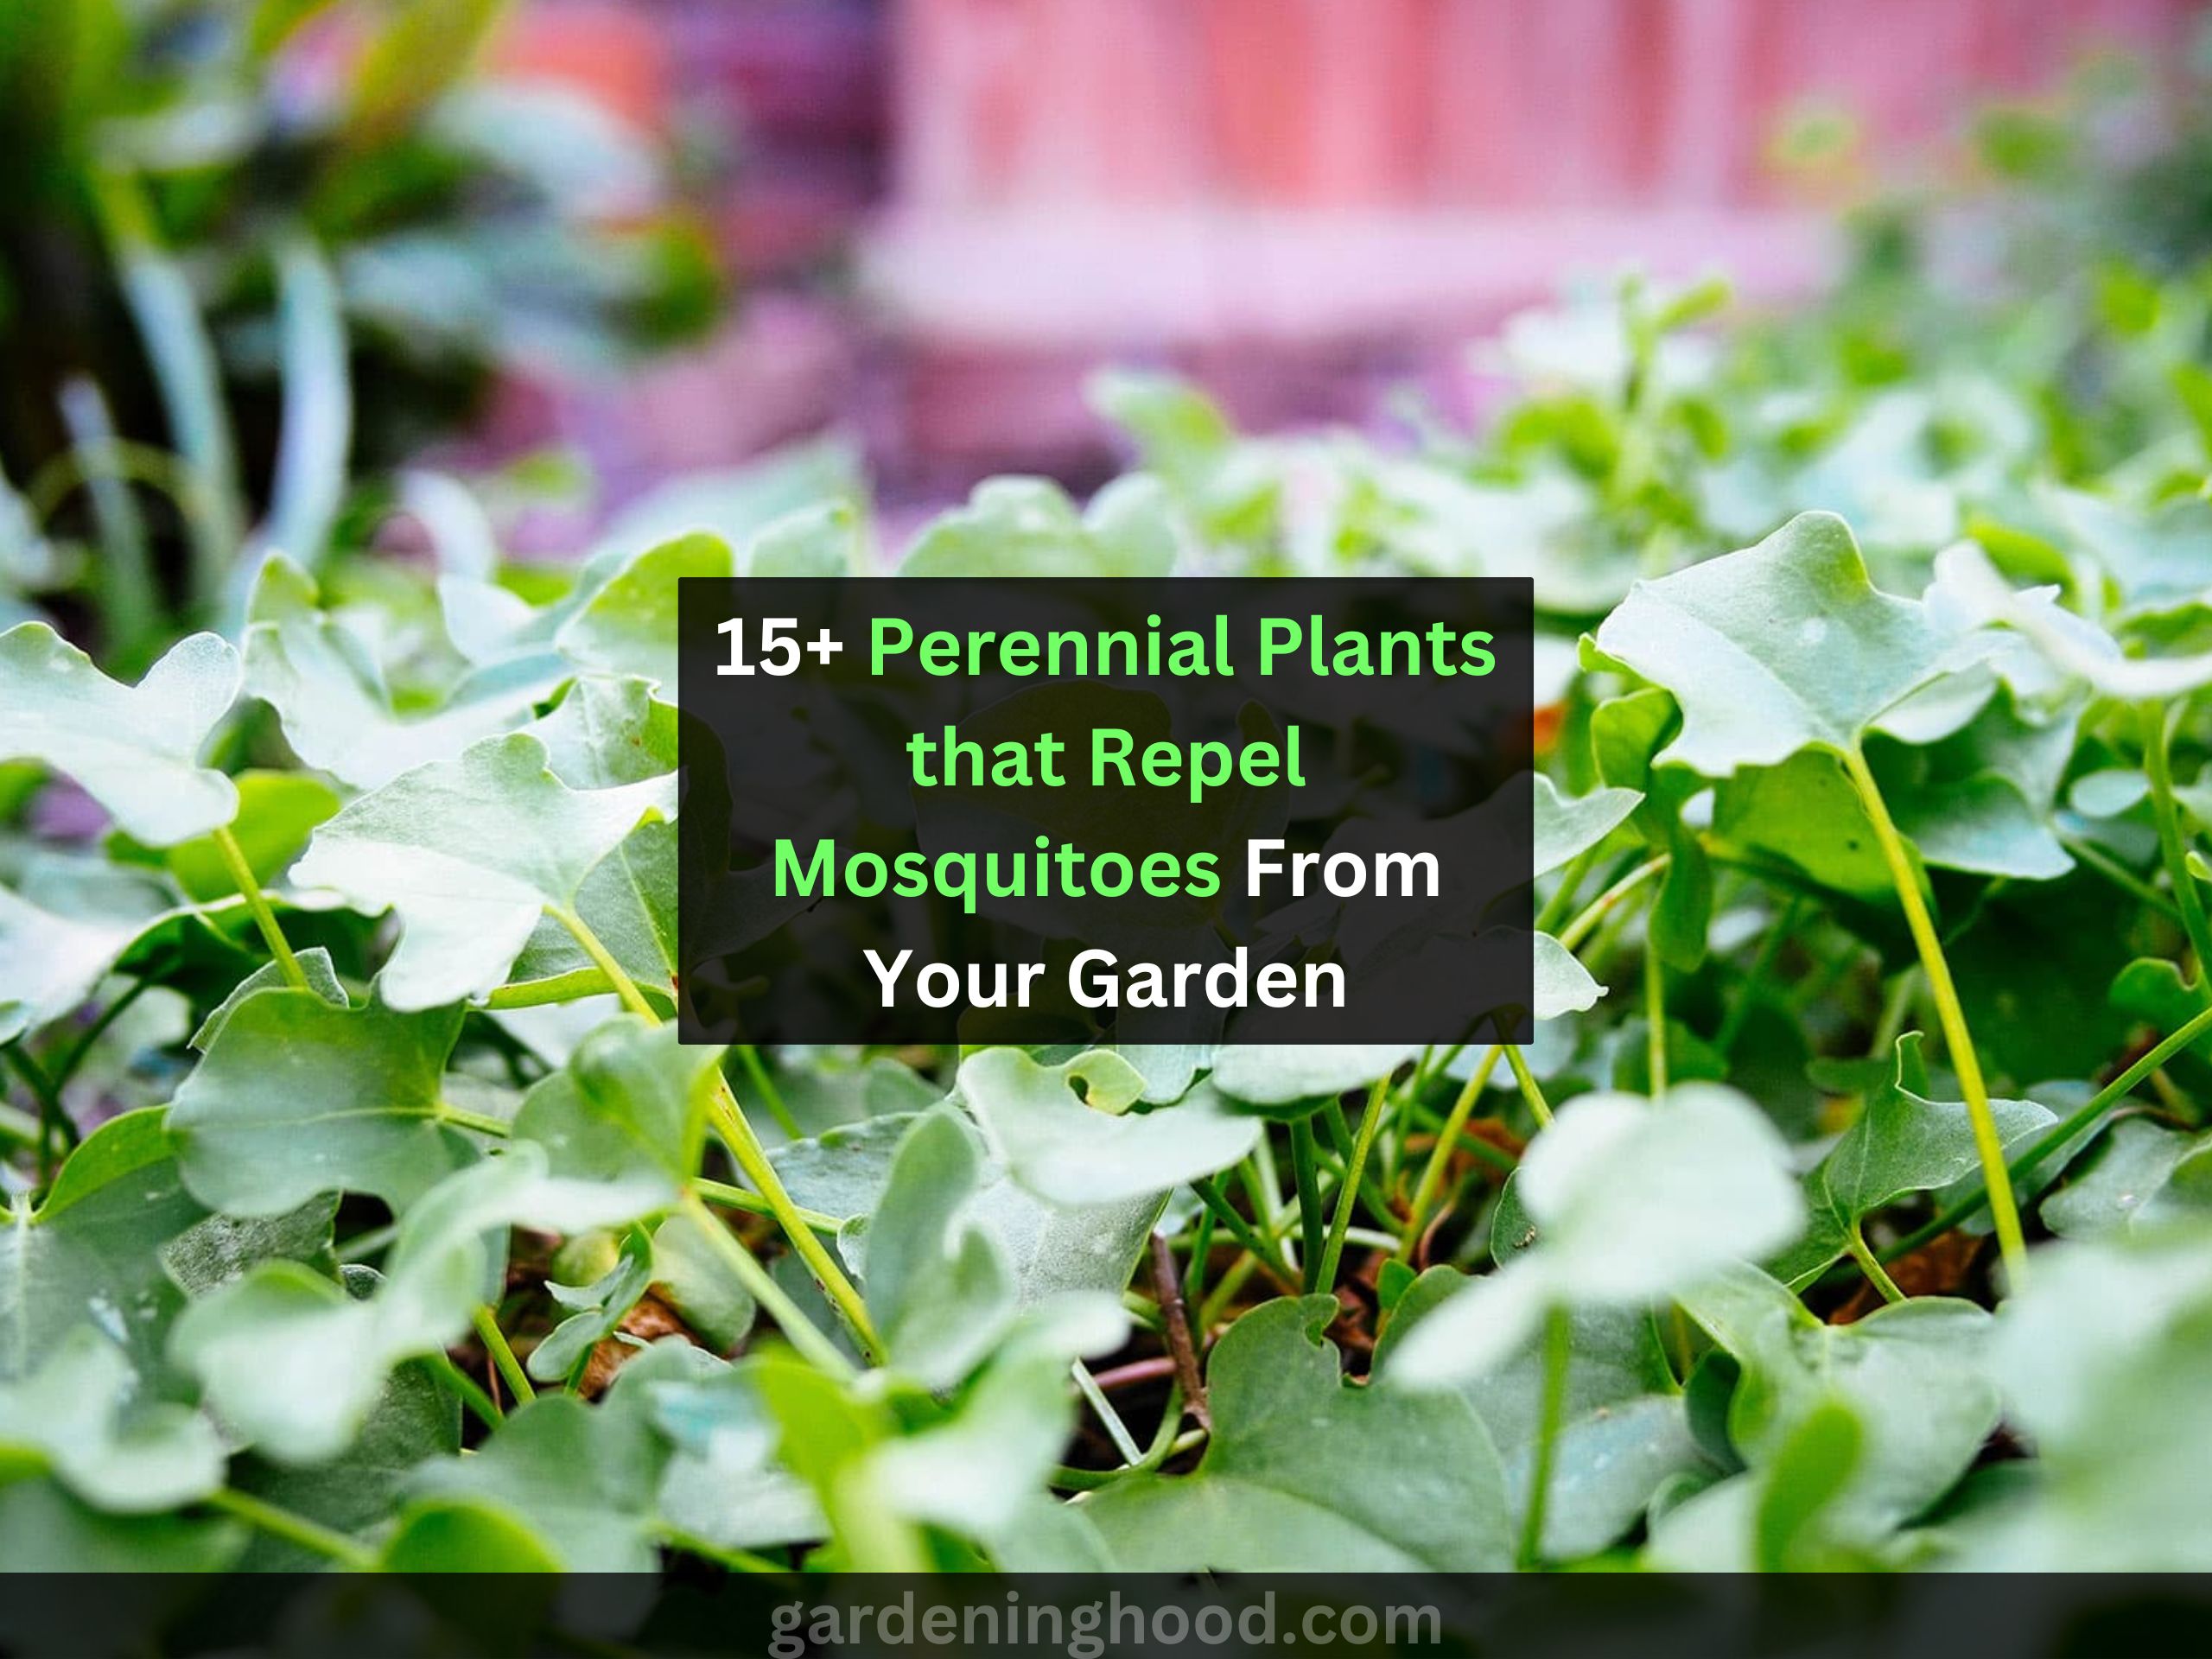 Perennial Plants that Repel Mosquitoes From Your Garden